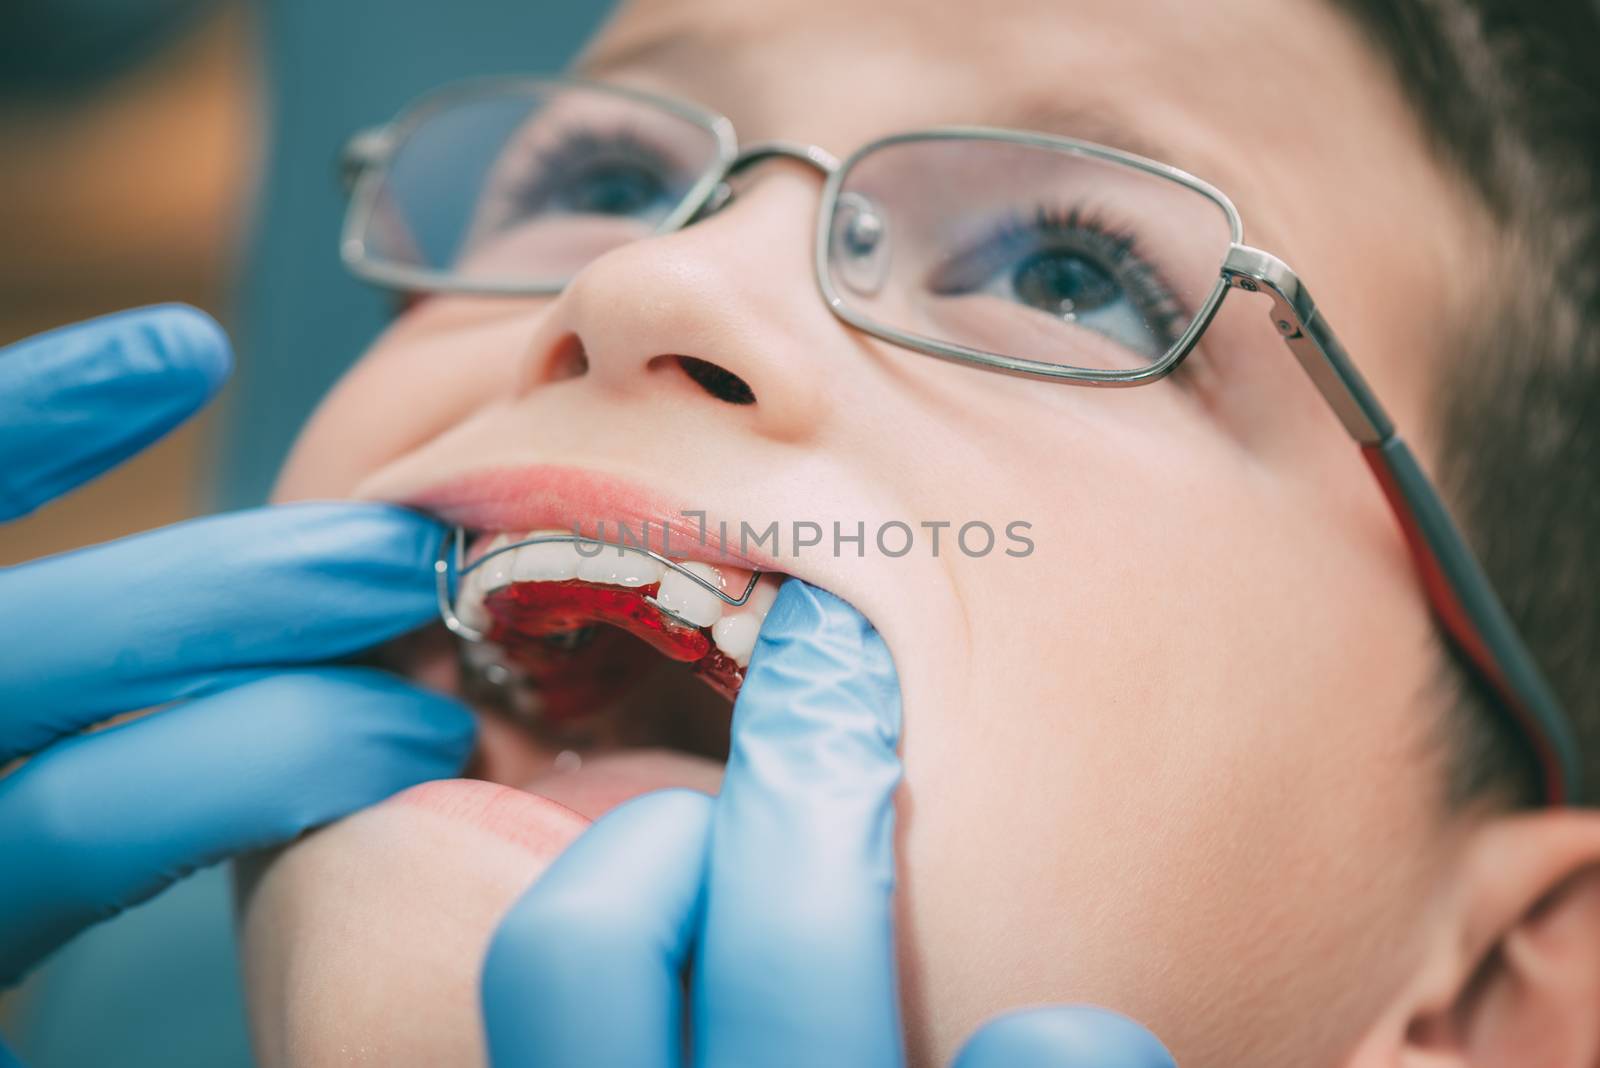 Little Boy At The Dentist by MilanMarkovic78